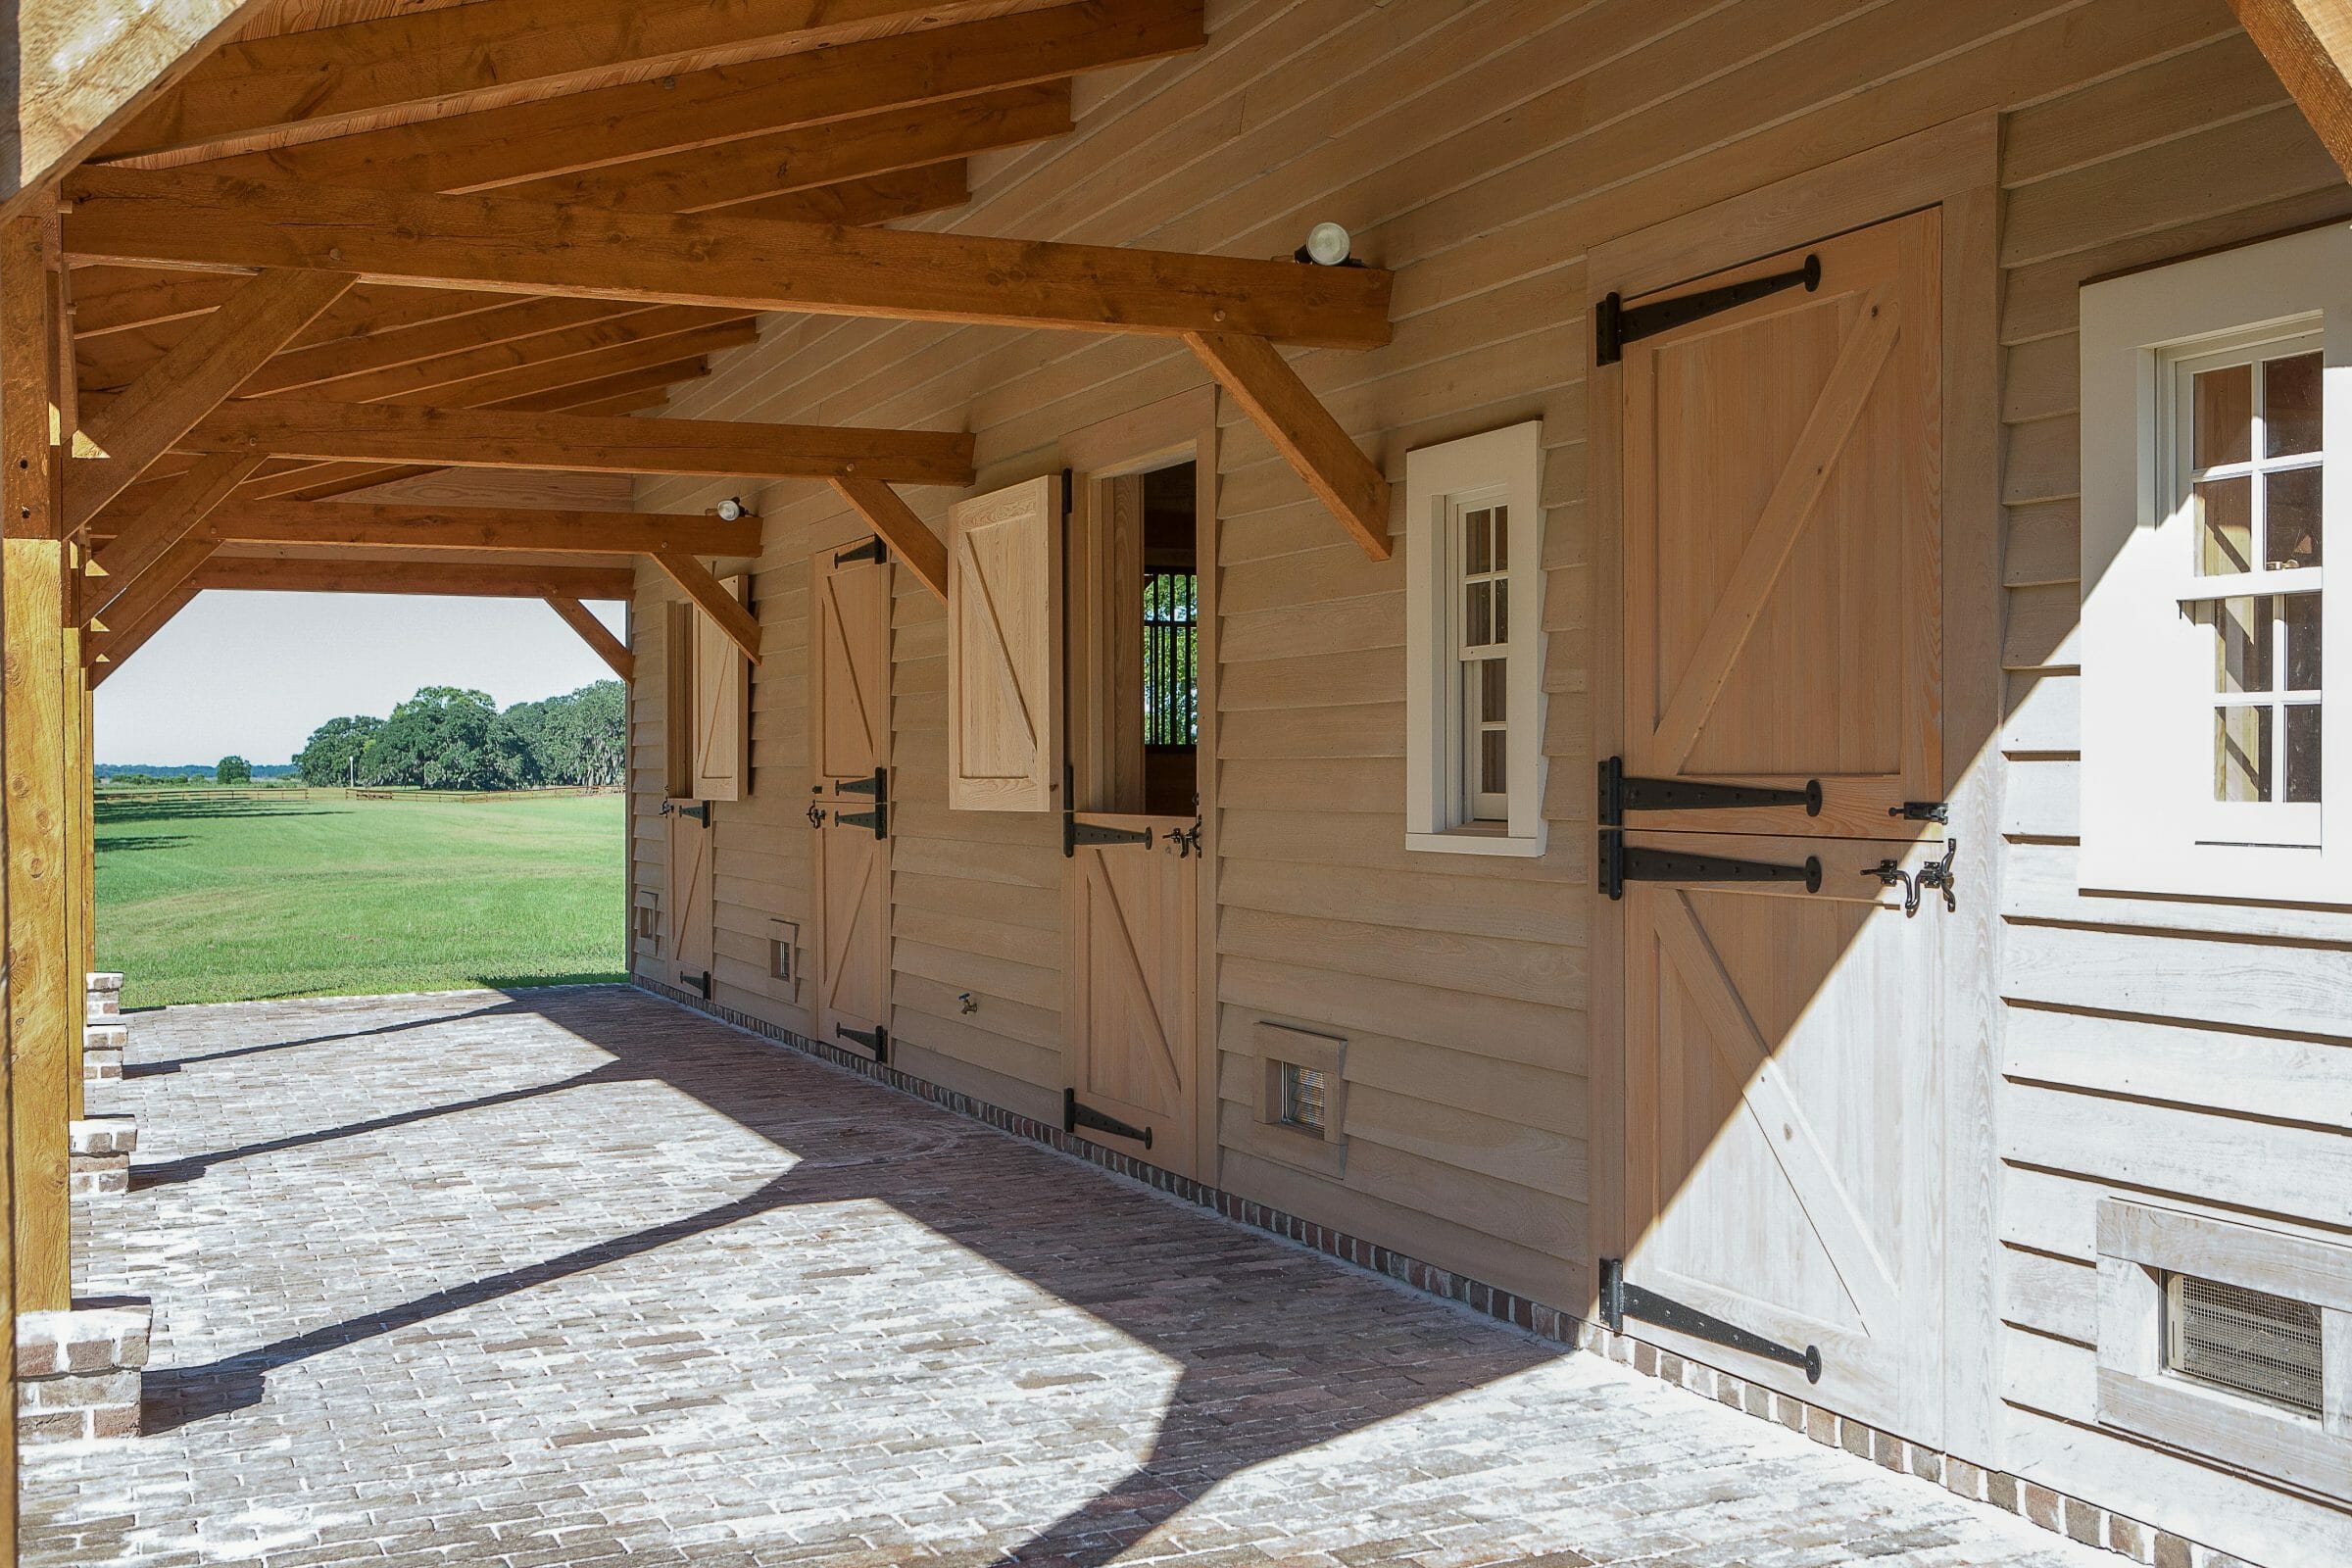 Carolina Horse Barn: Handcrafted Timber Stable